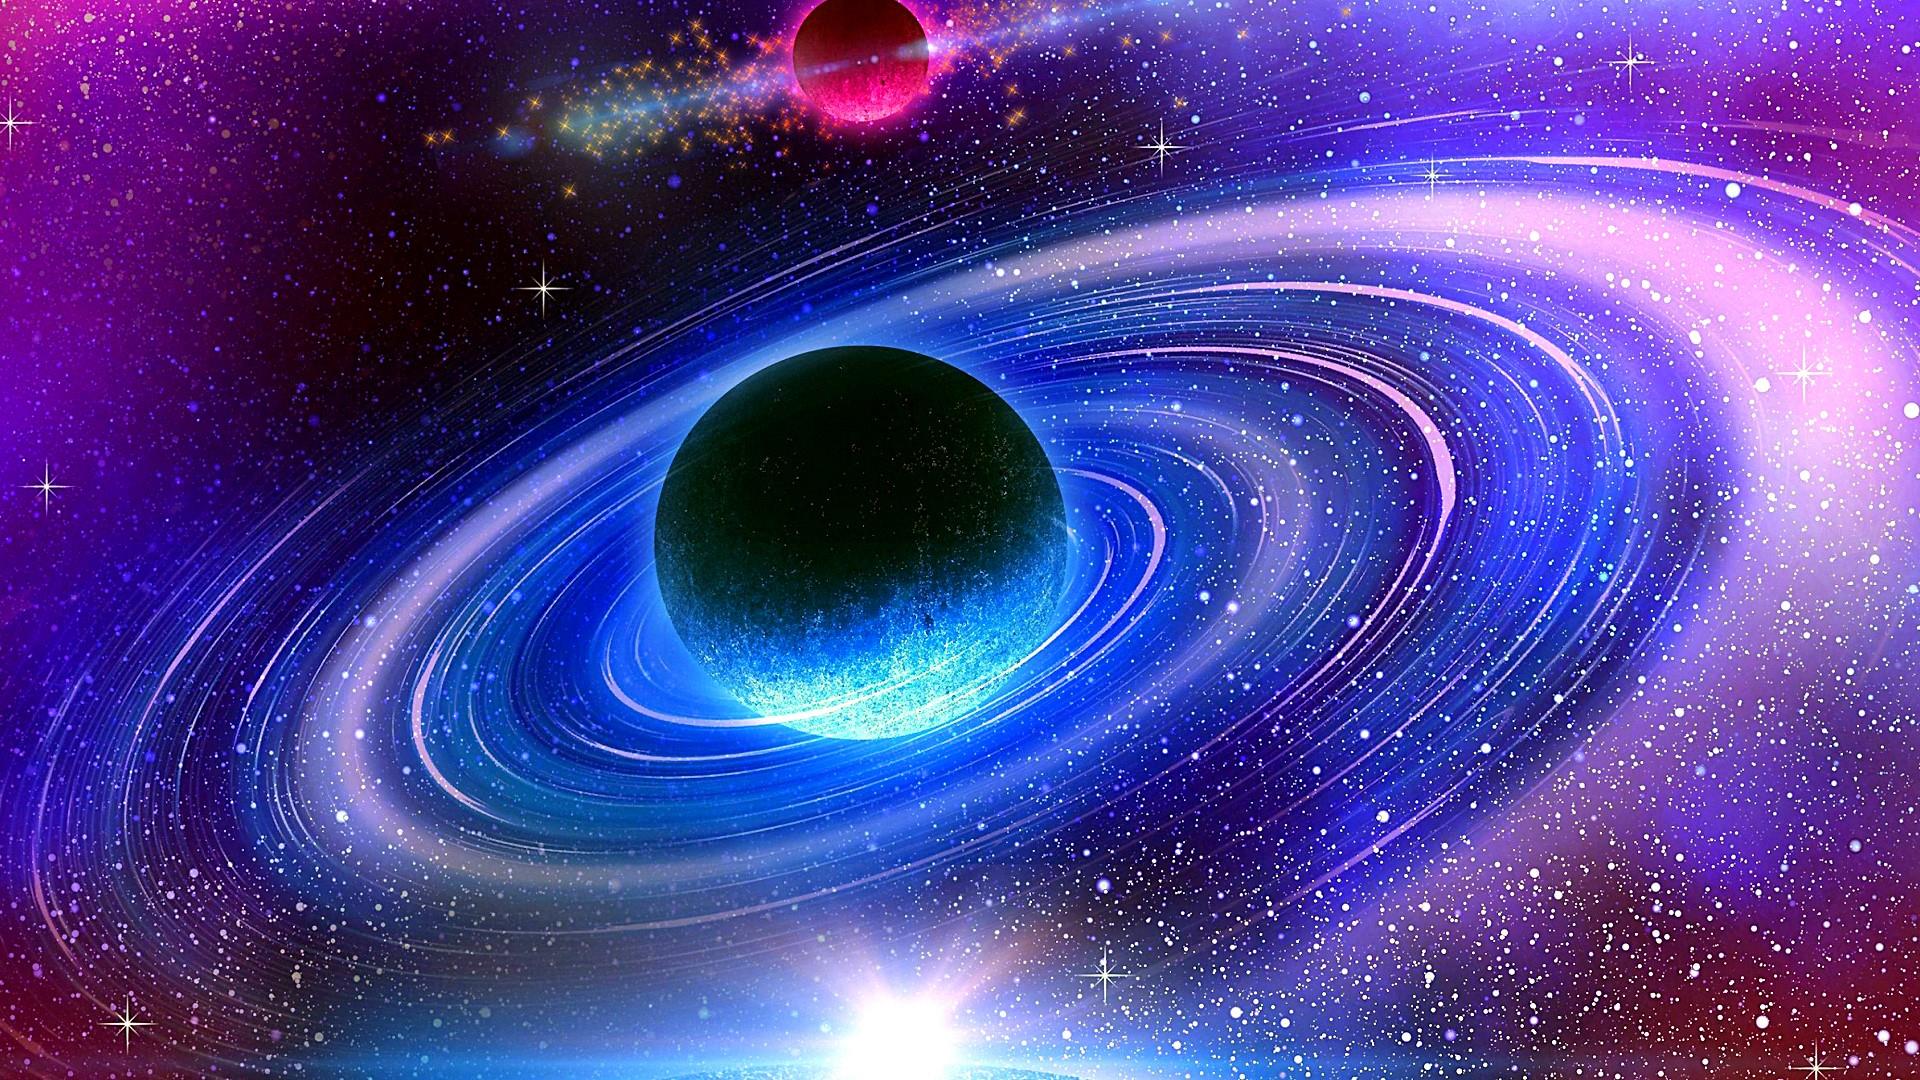 Wallpaper Of Planet, Space, Star, Galaxy Background - Planet